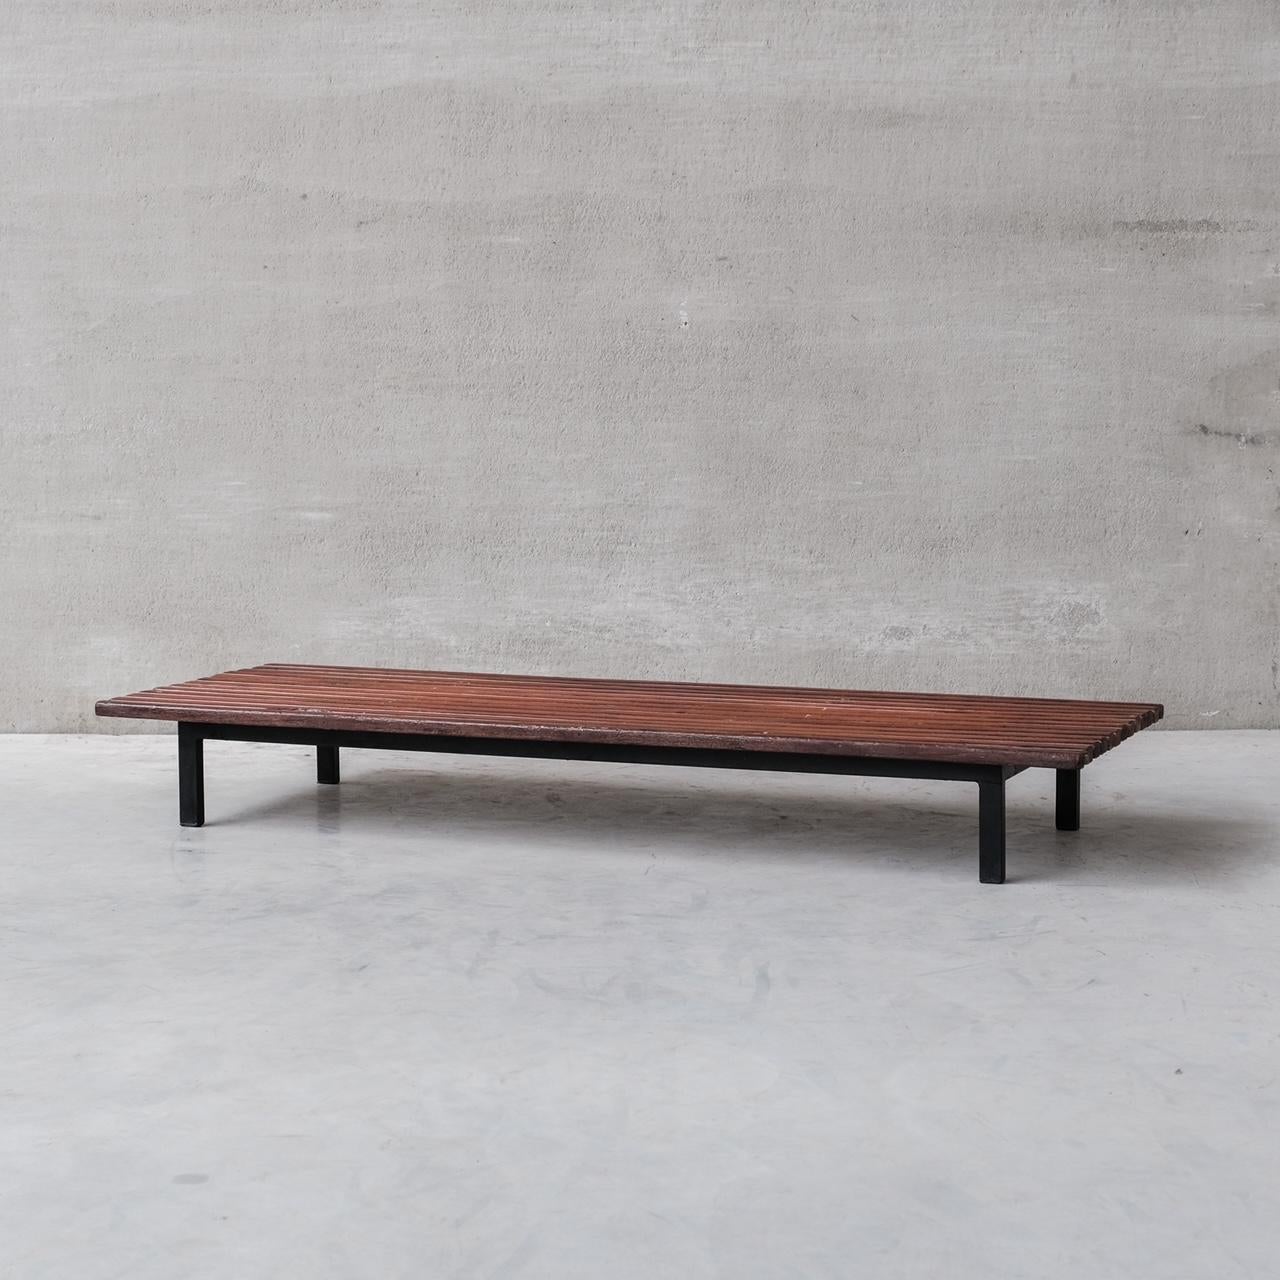 French Charlotte Perriand 'Cansado' Bench / Coffee Table for Steph Simon 'No.2'